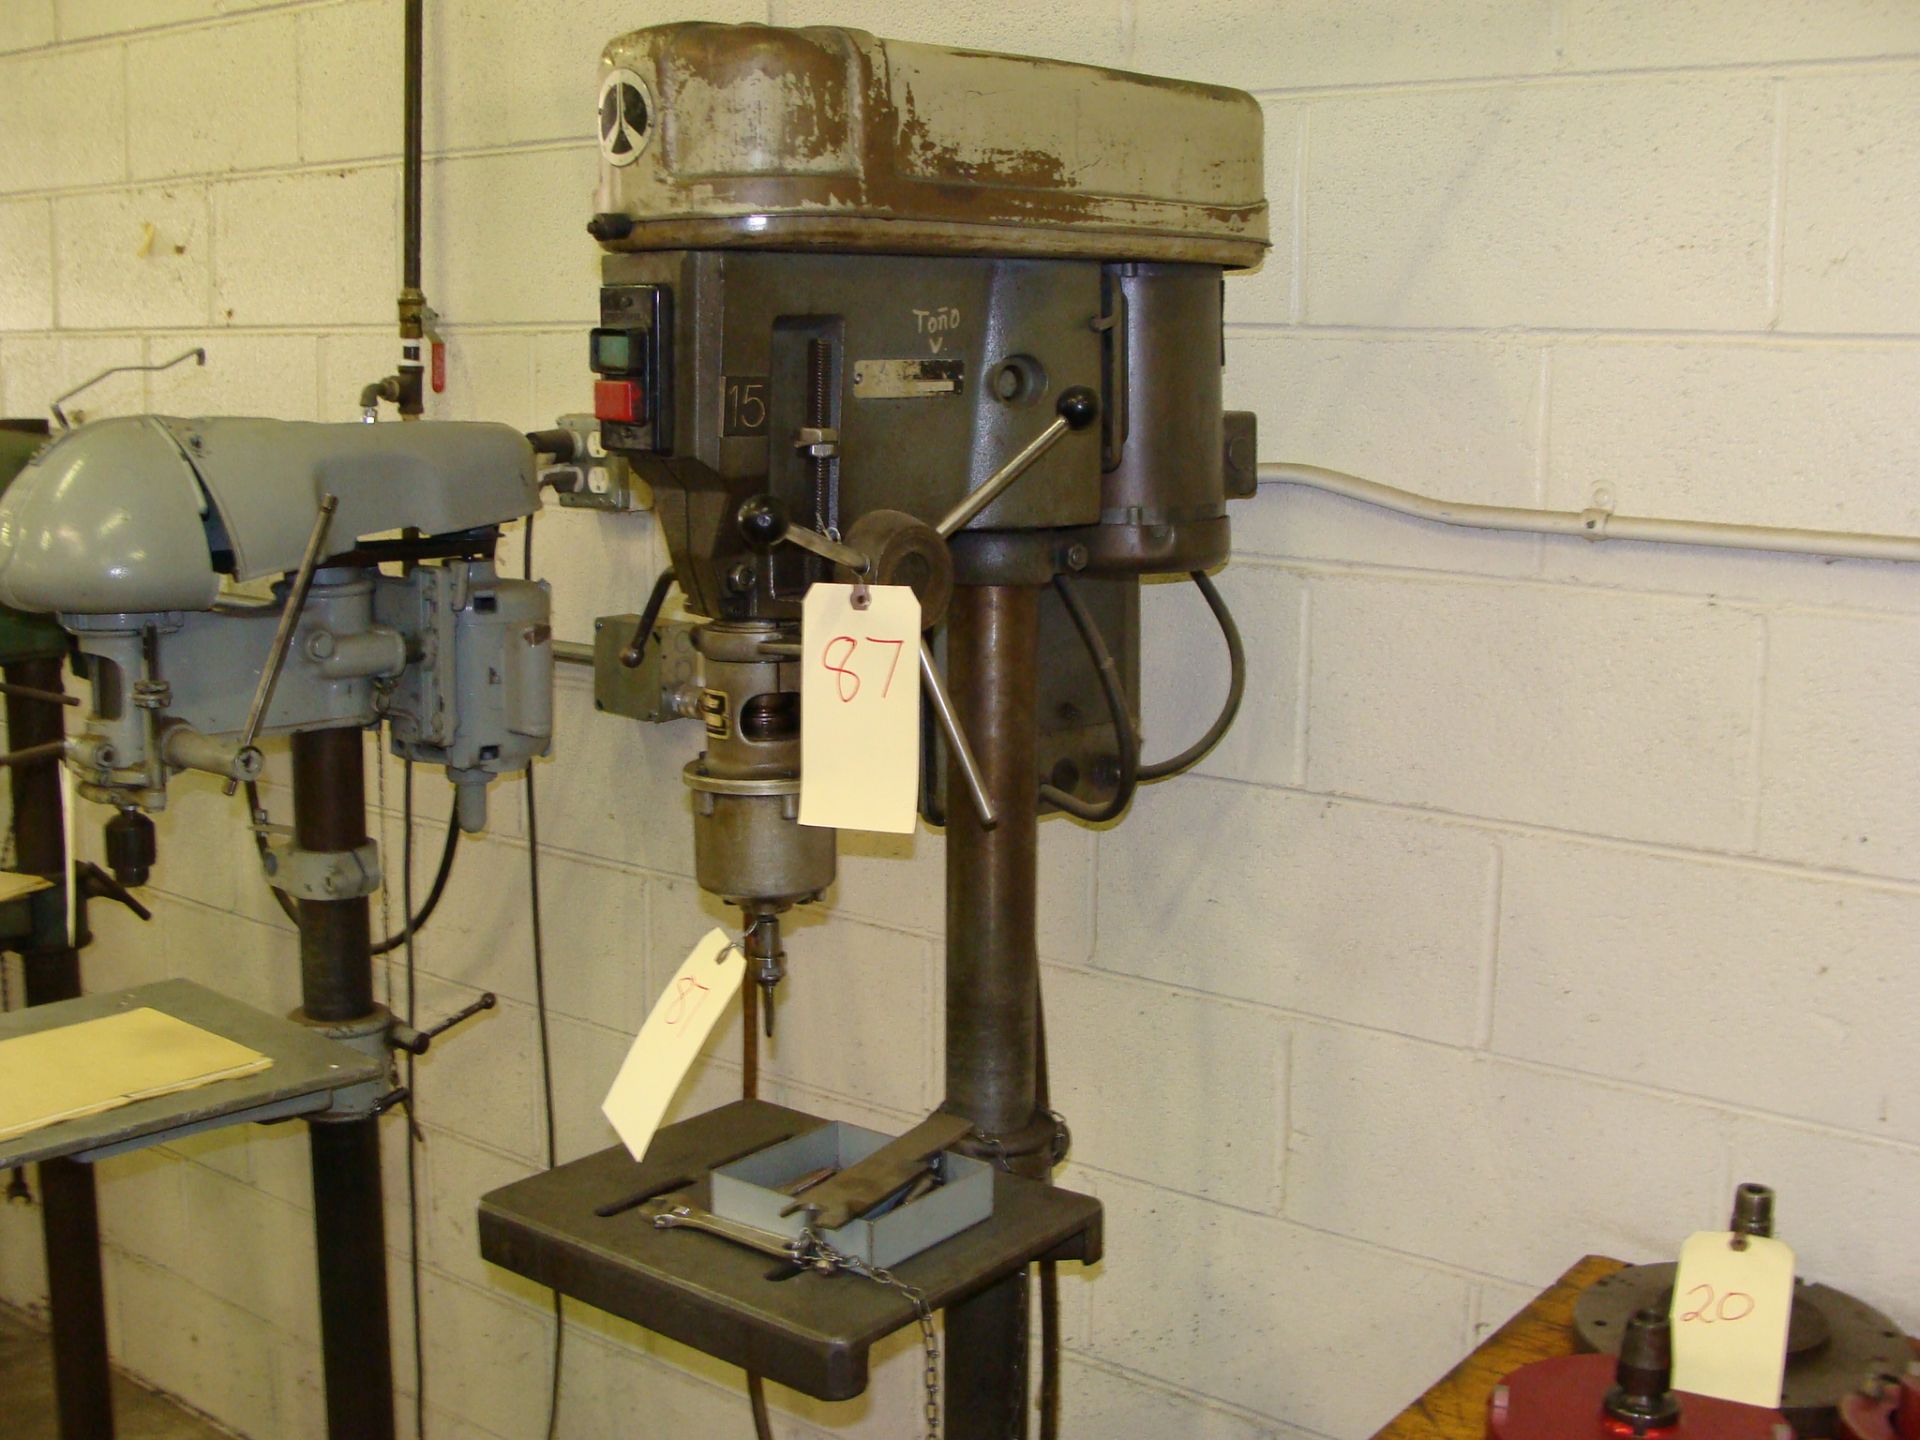 Rockwell Model 15665 Drill Press Serial # 1767870 with Procunier Taping Head